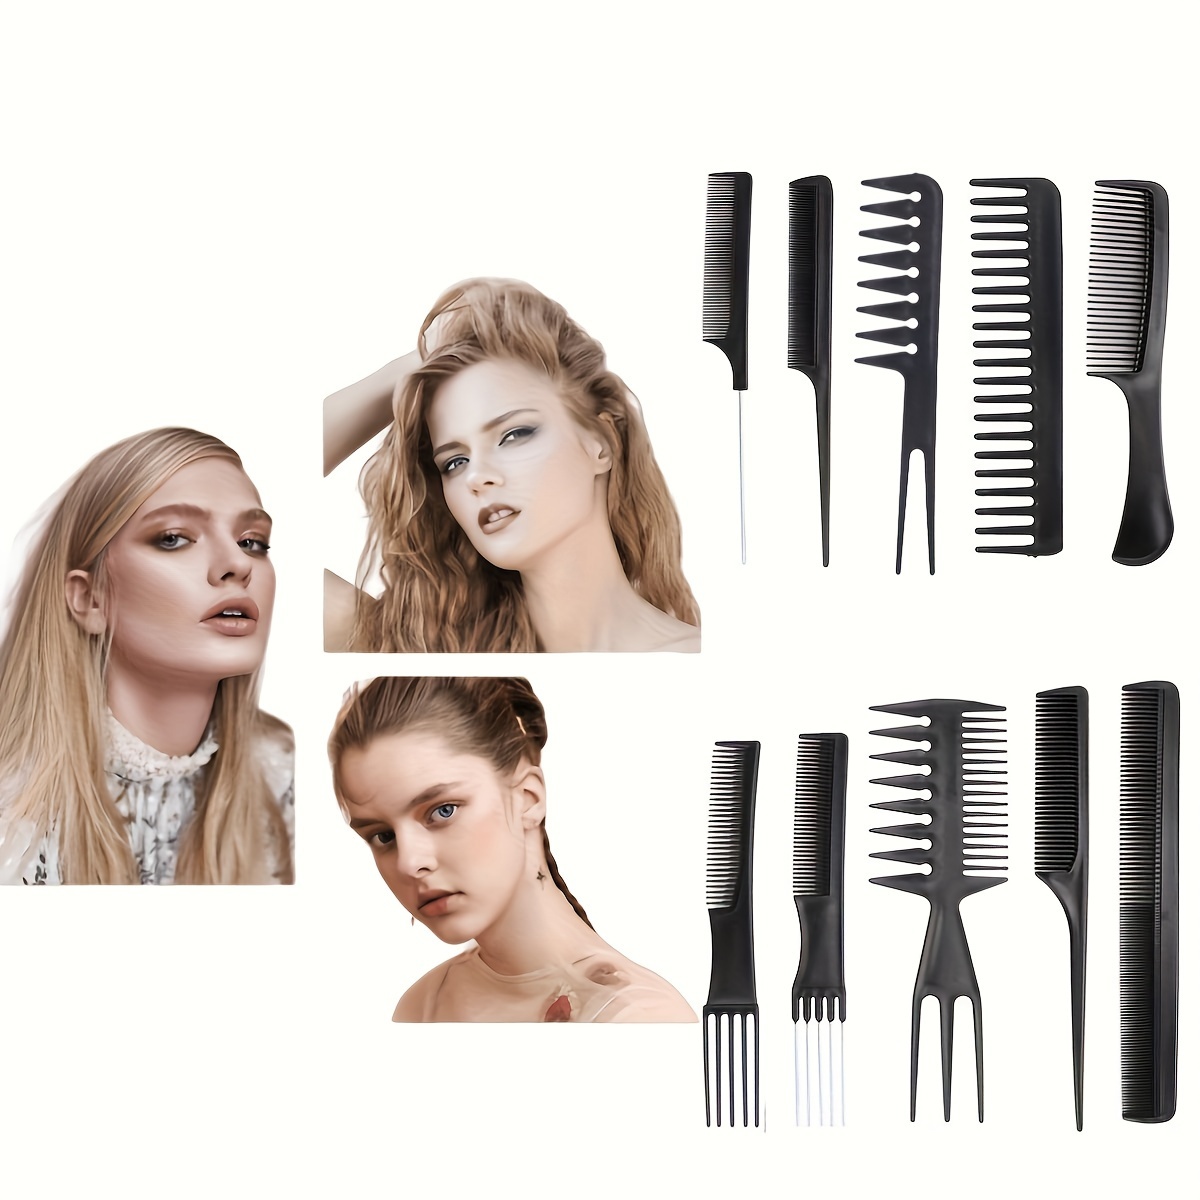 

10pcs Barber Hairdressing Comb Set, Professional Hair Styling Comb, Black Plastic Practical Tool Supplies